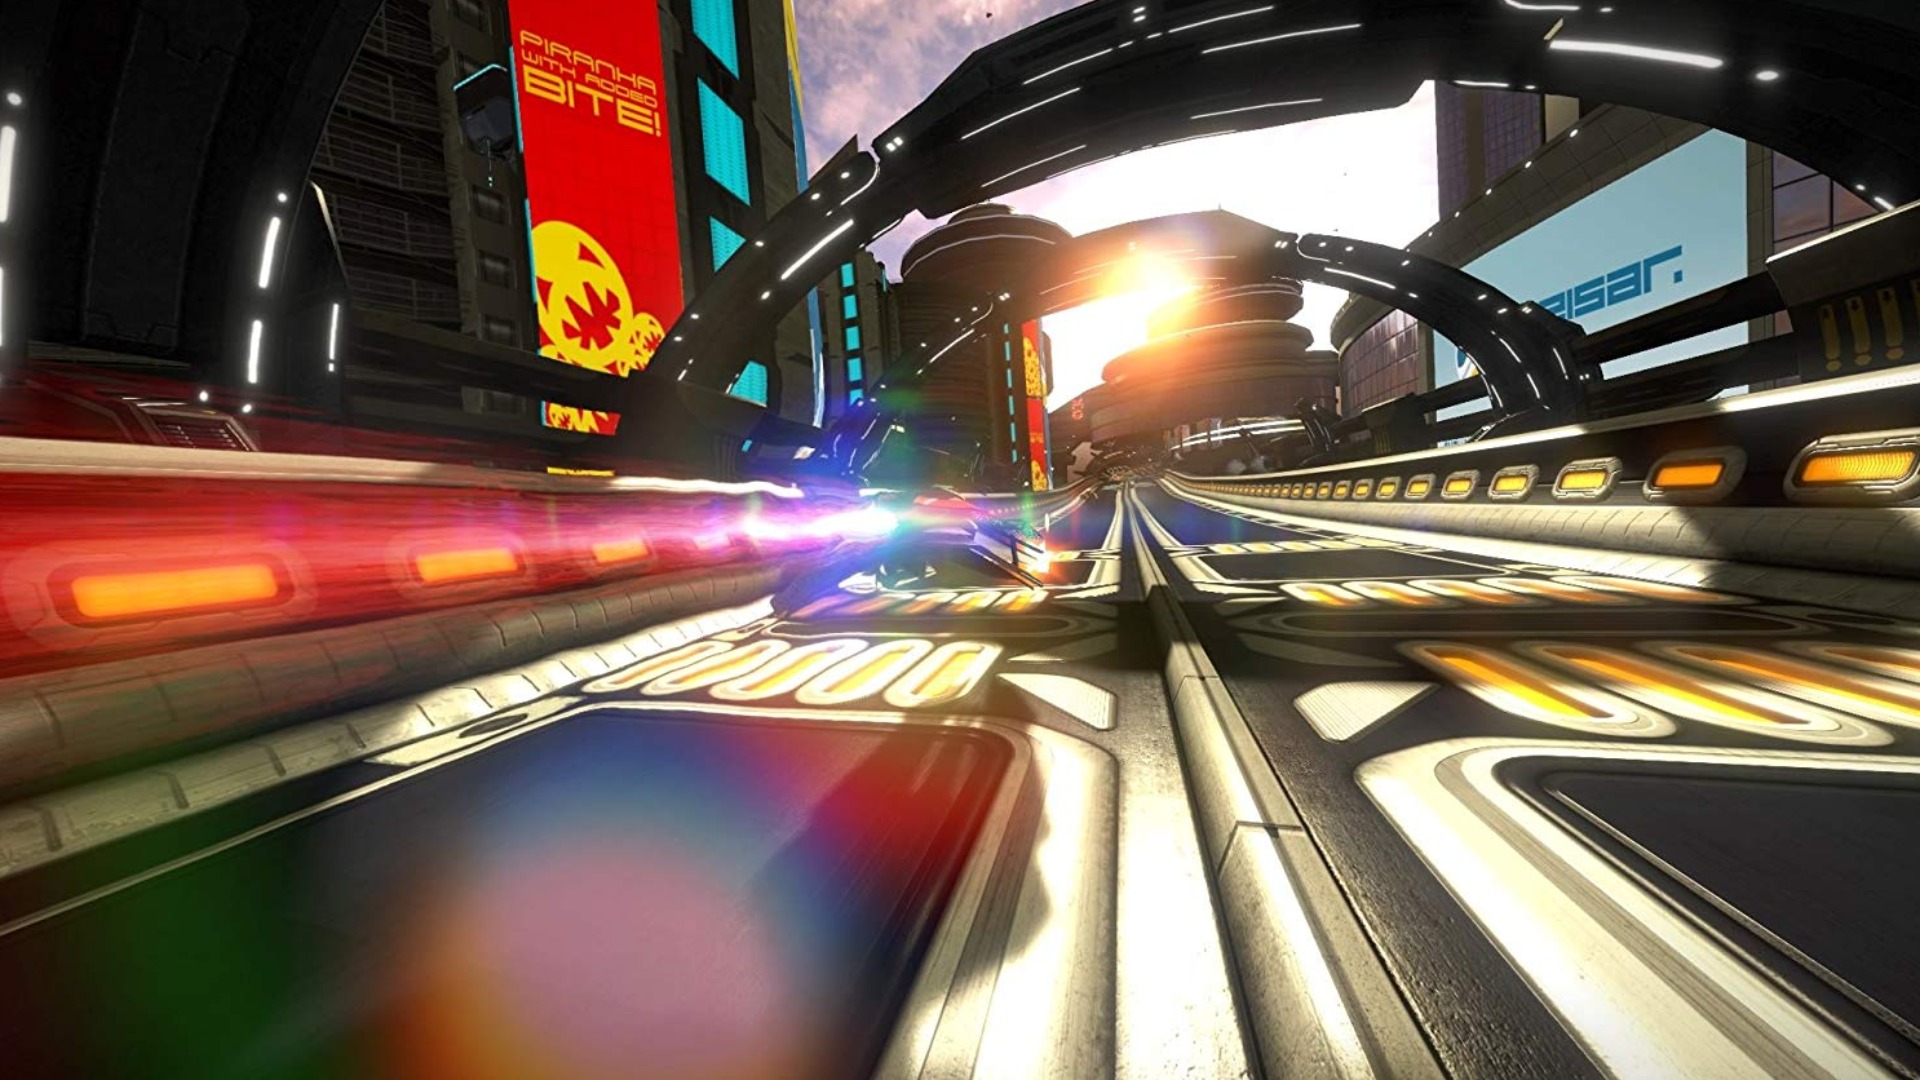 WipEout Omega' Looks, Sounds, and Plays Brilliantly on PSVR